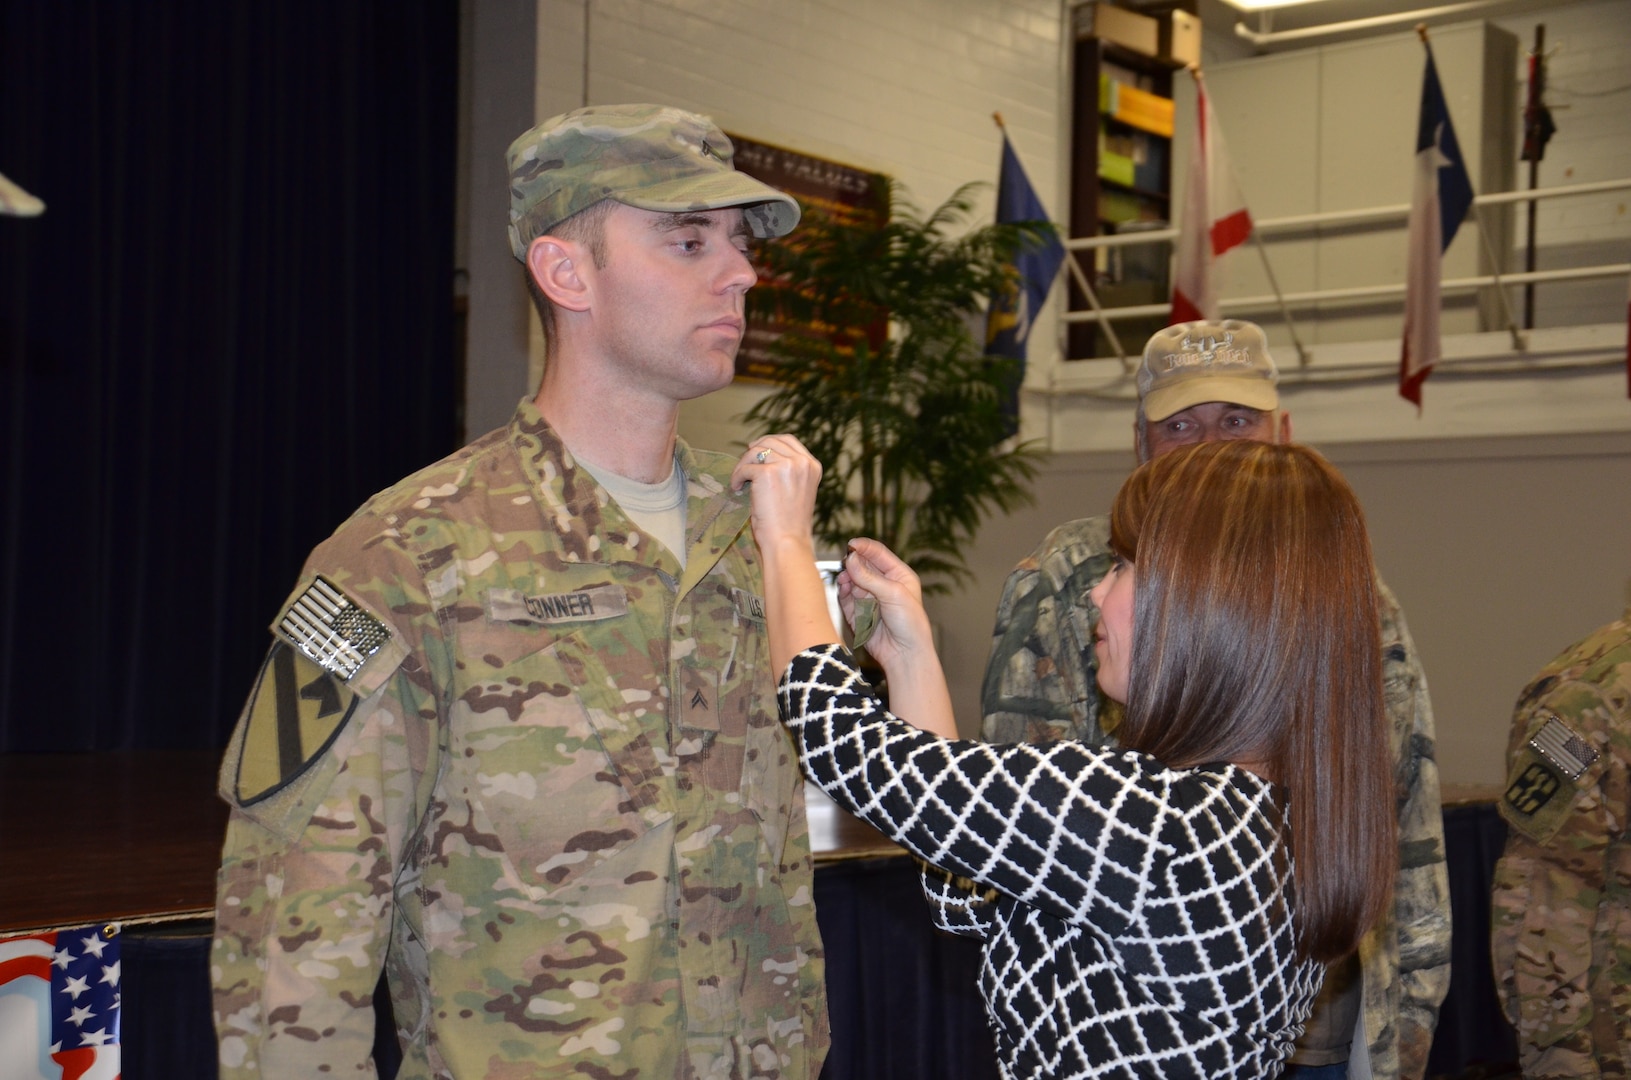 Sara Conner pins the rank of sergeant on her husband, Cpl. Christopher Conner Nov. 19 after the 440th Blood Support Detachment welcome home ceremony at Roadrunner Community Center on Joint  Base San Antonio-Fort Sam Houston. (Photo by Lori Newman, JBSA-Fort Sam Houston Public Affairs)